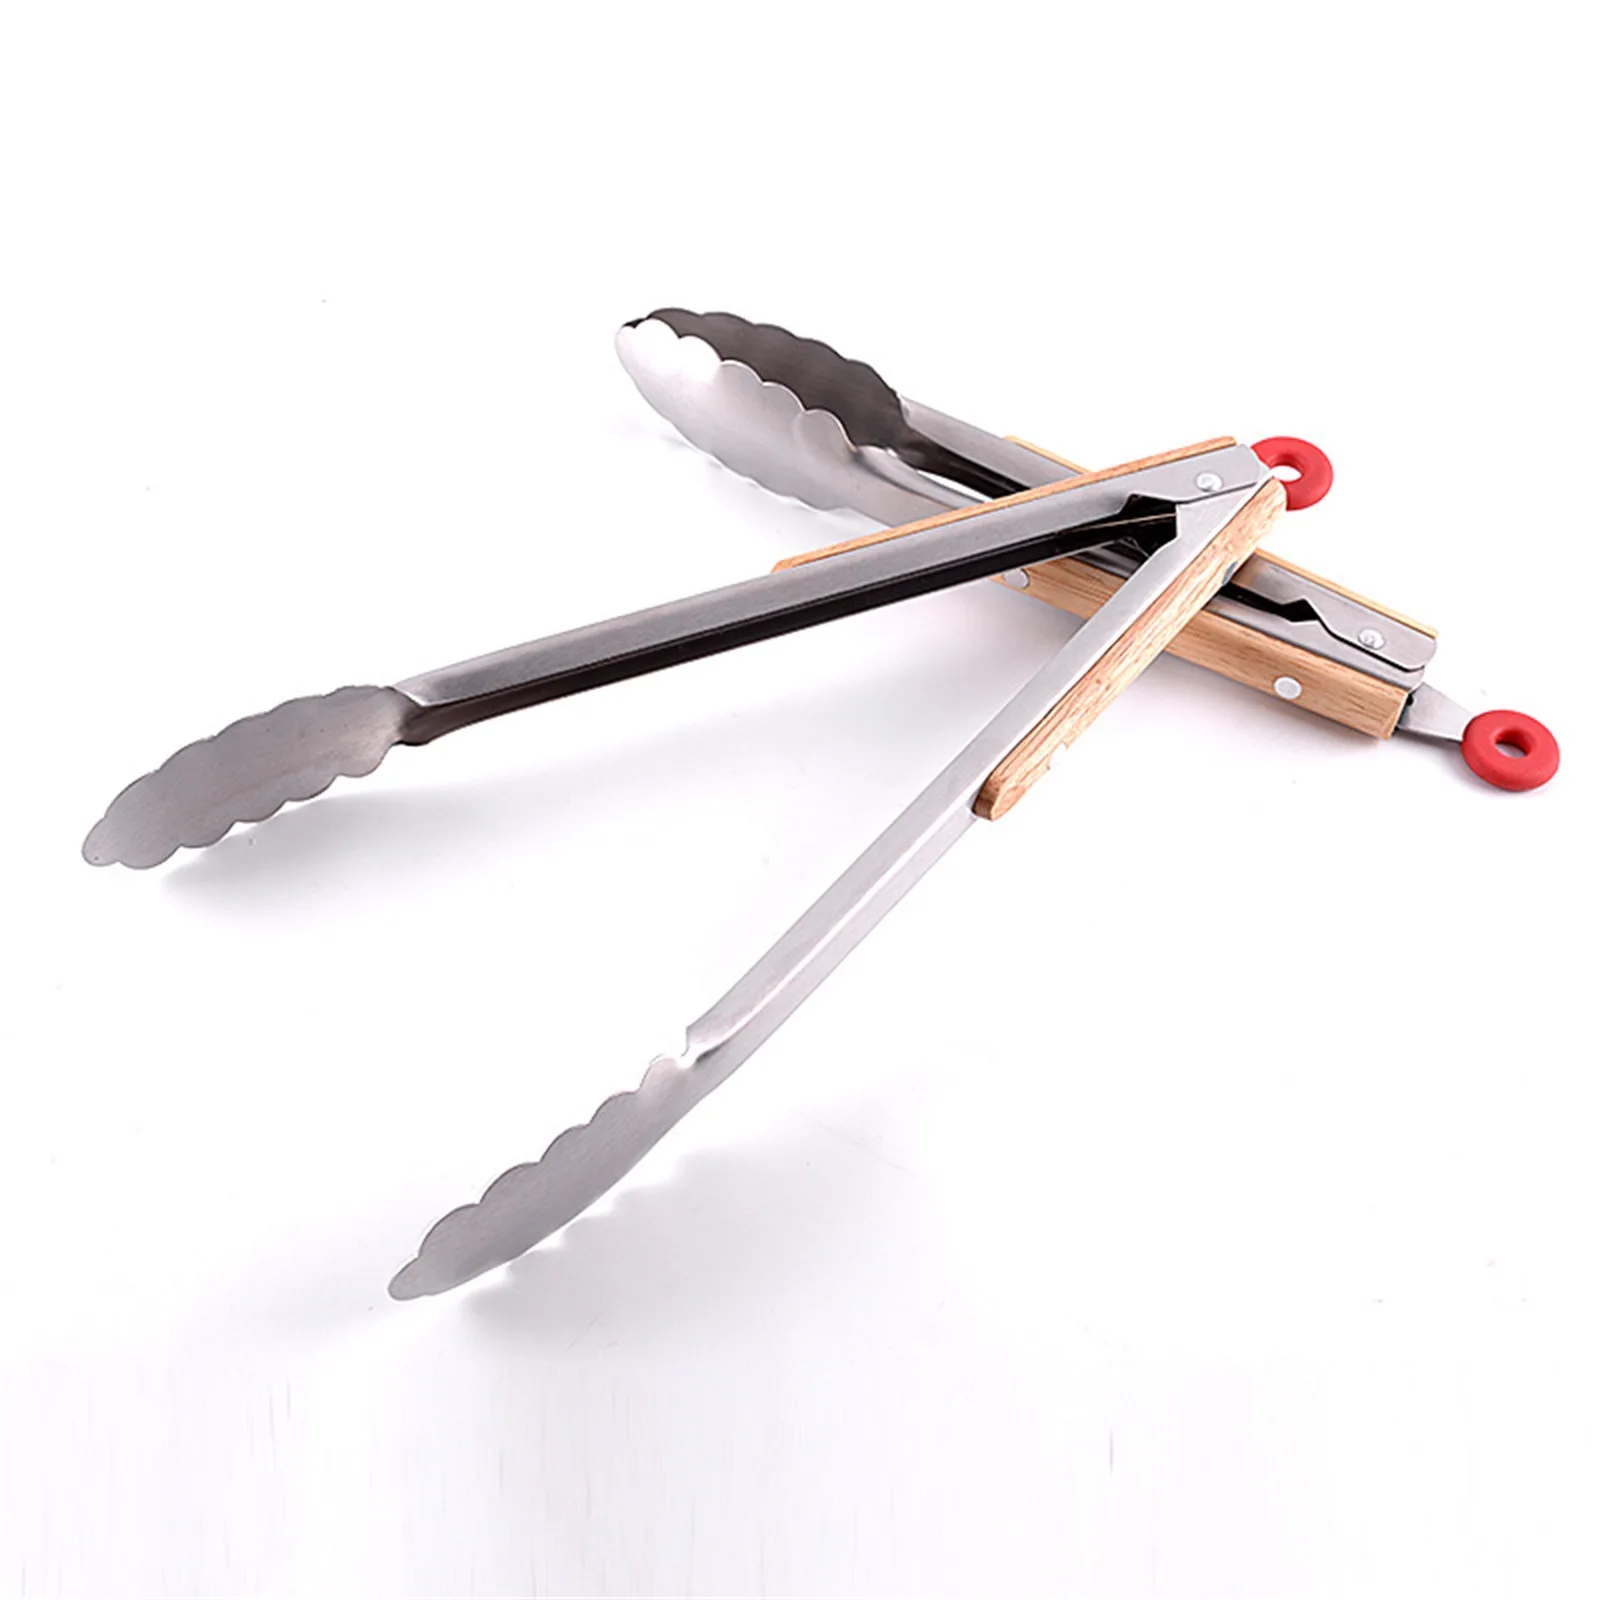 Metal Tongs Stainless Steel BBQ Grill Tongs with Oak Wood Handle Cooking Kitchen Tongs Locking Food for Grilling